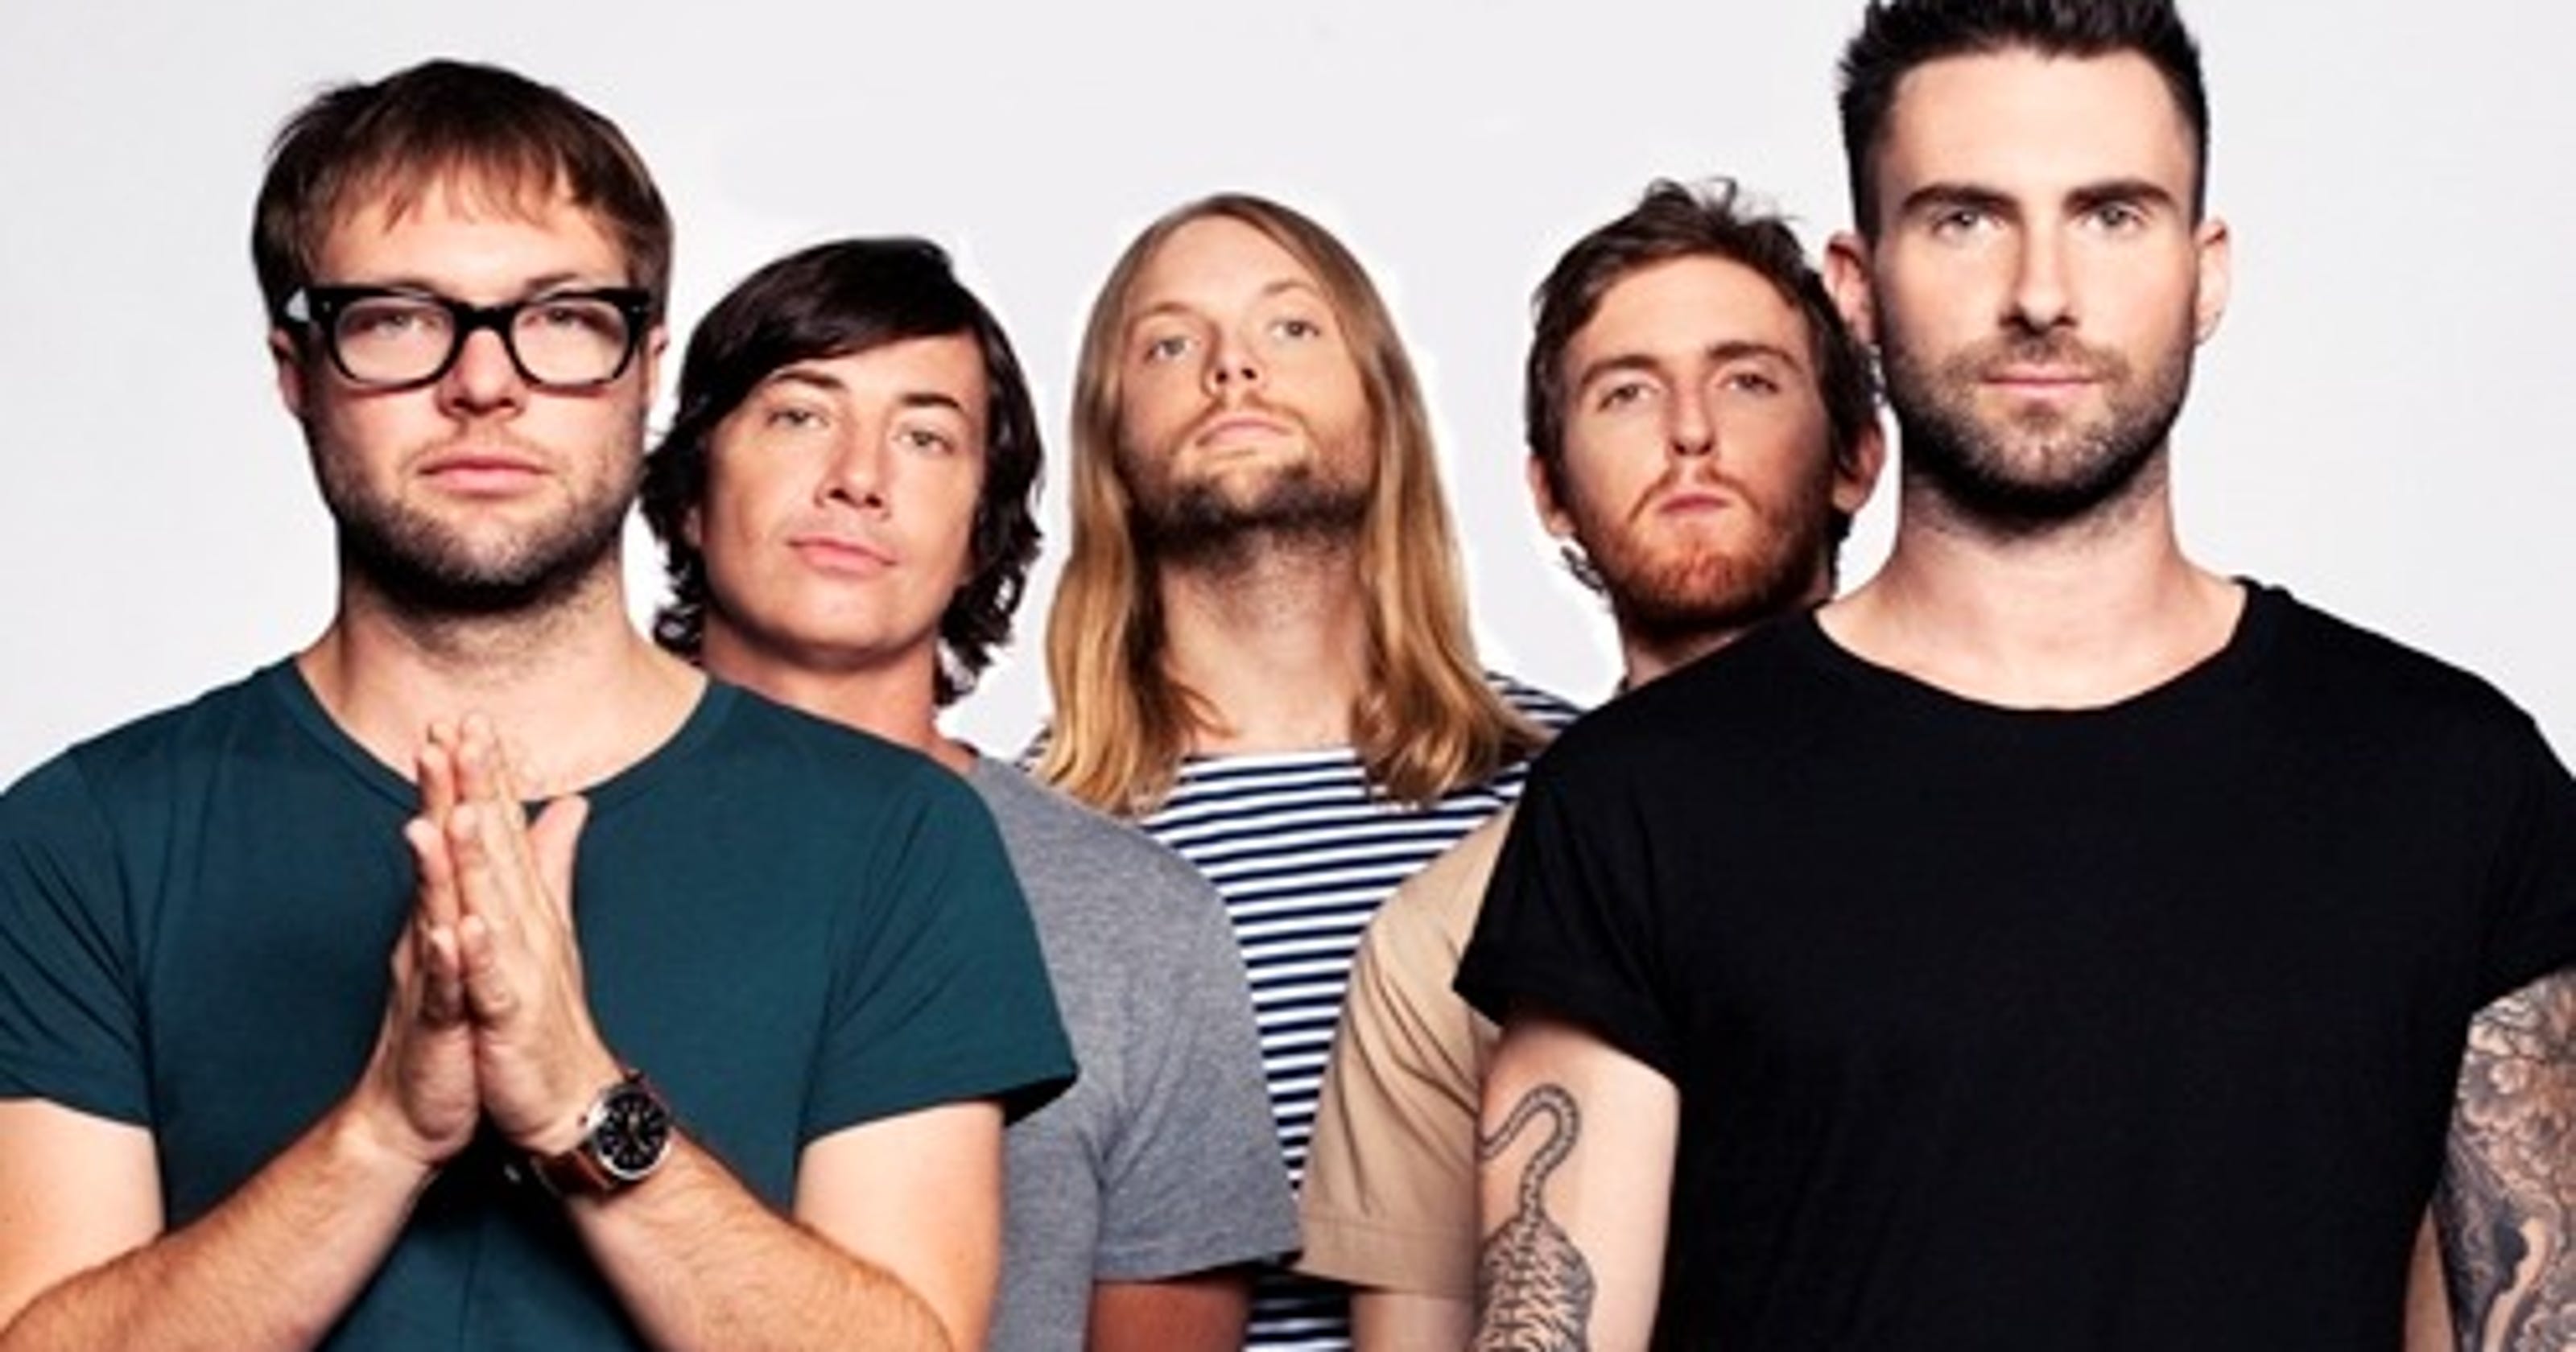 Who Are the Members of Maroon 5?